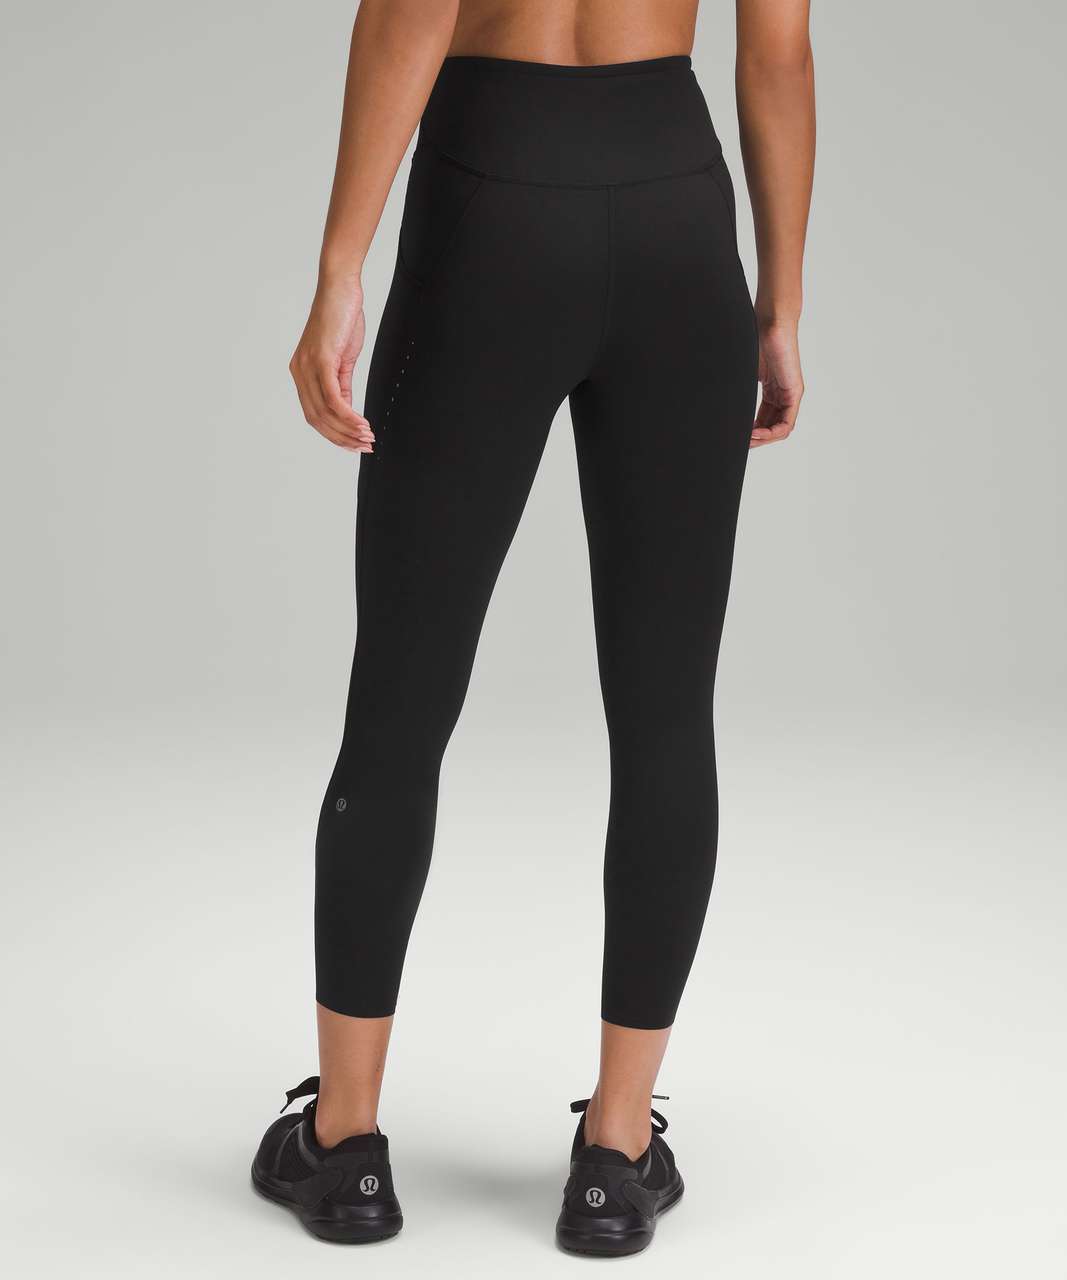 Lululemon Fast and Free High-Rise Tight 25" *Pockets - Black